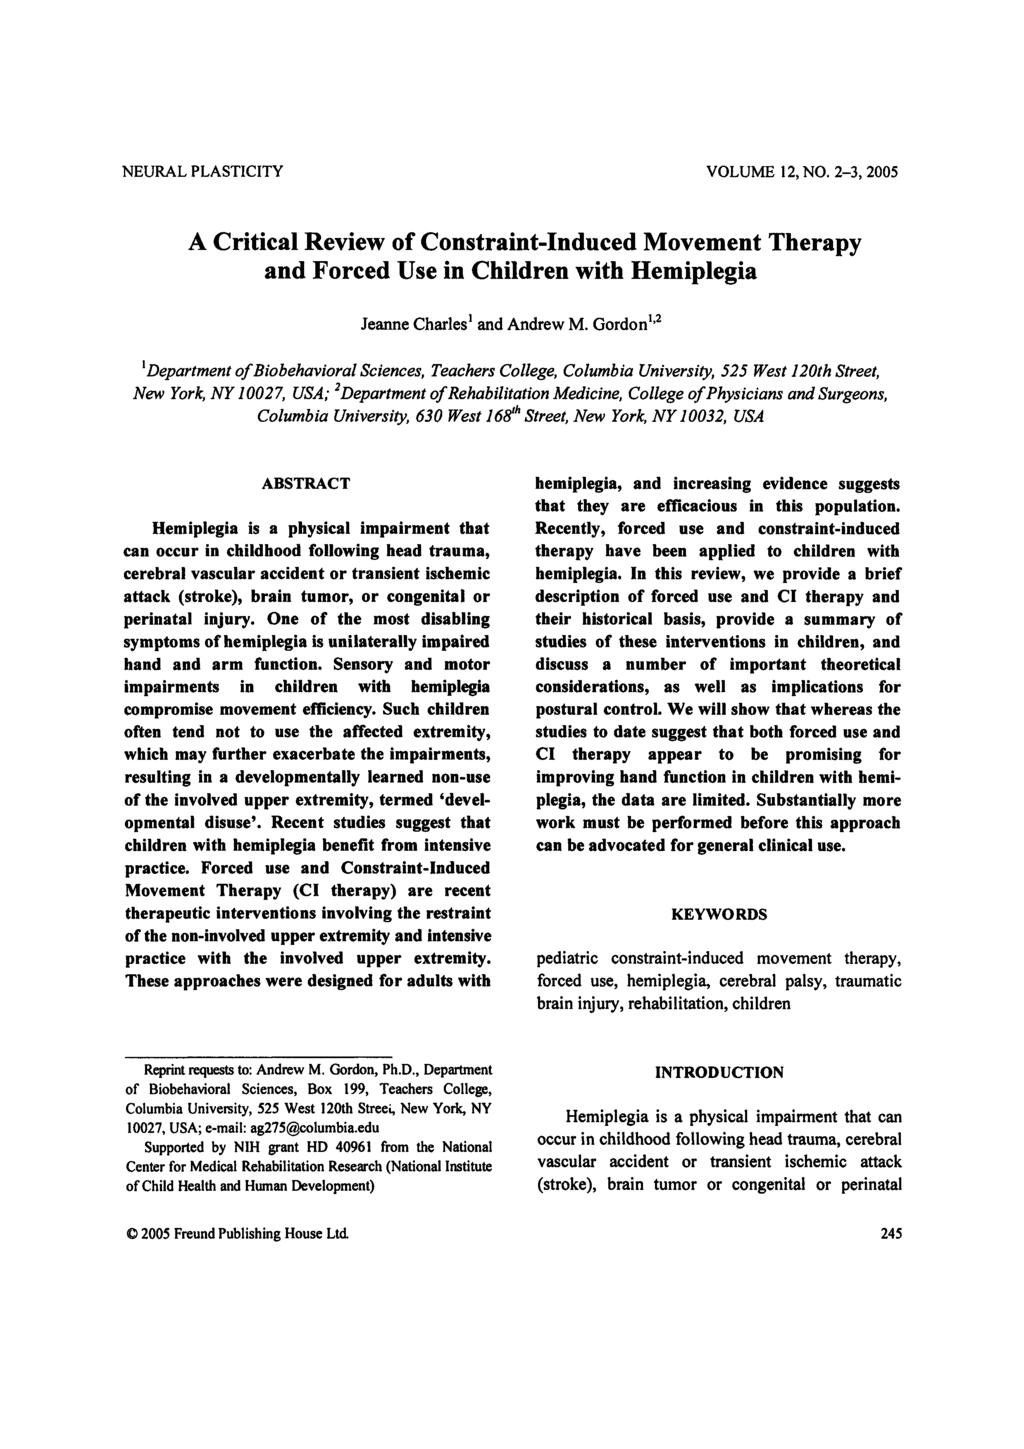 NEURAL PLASTICITY VOLUME 12, NO. 2-3, 2005 A Critical Review of Constraint-Induced Movement Therapy and Forced Use in Children with Hemiplegia Jeanne Charles and Andrew M.